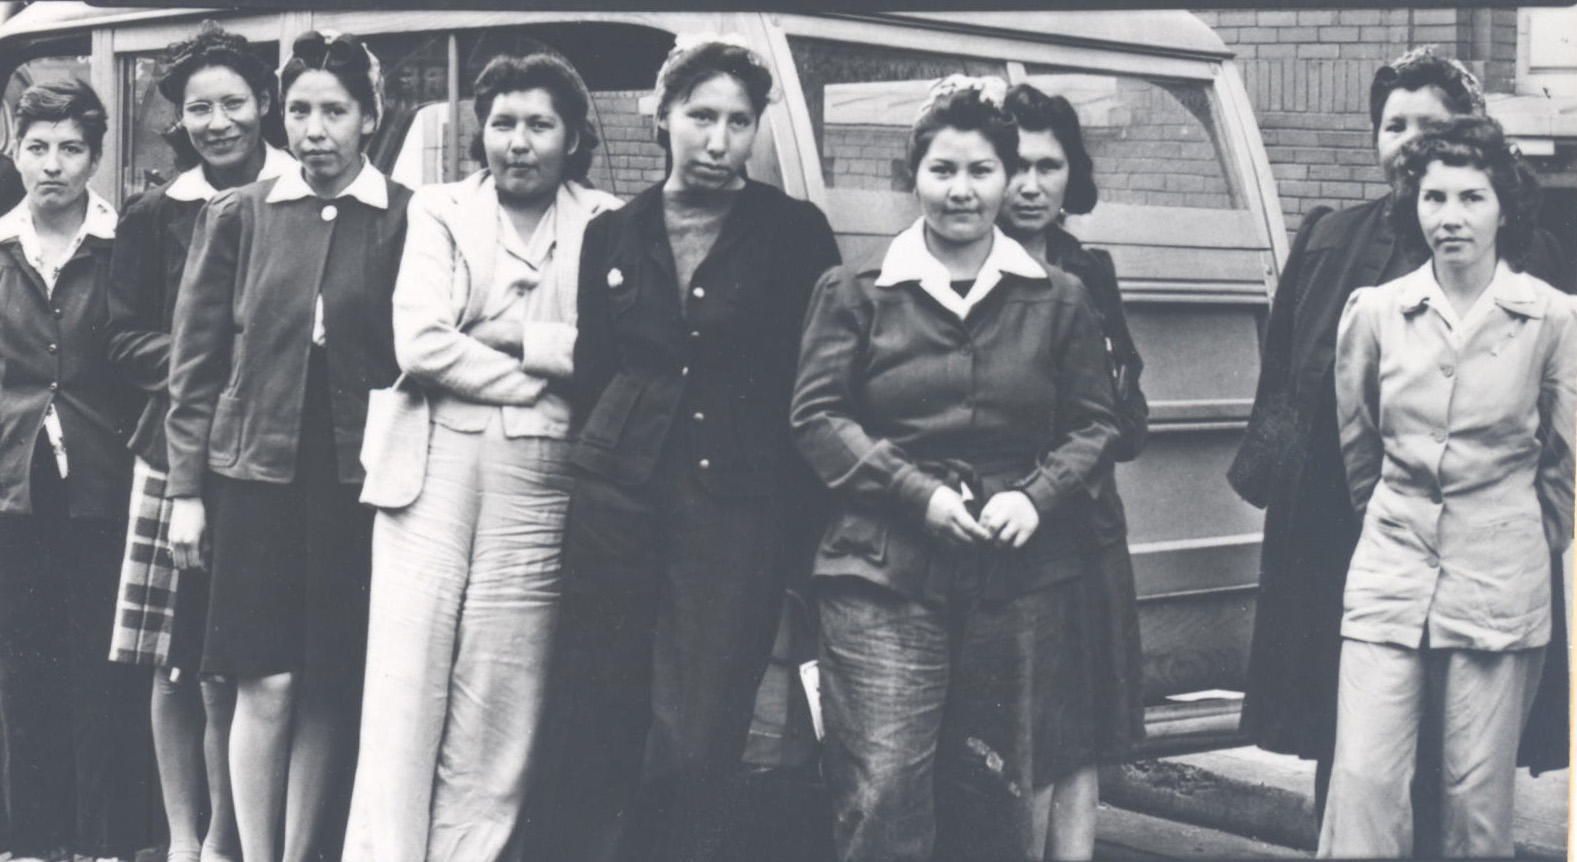 Preview of next document: Native American women from Chemawa train to work in shipyards